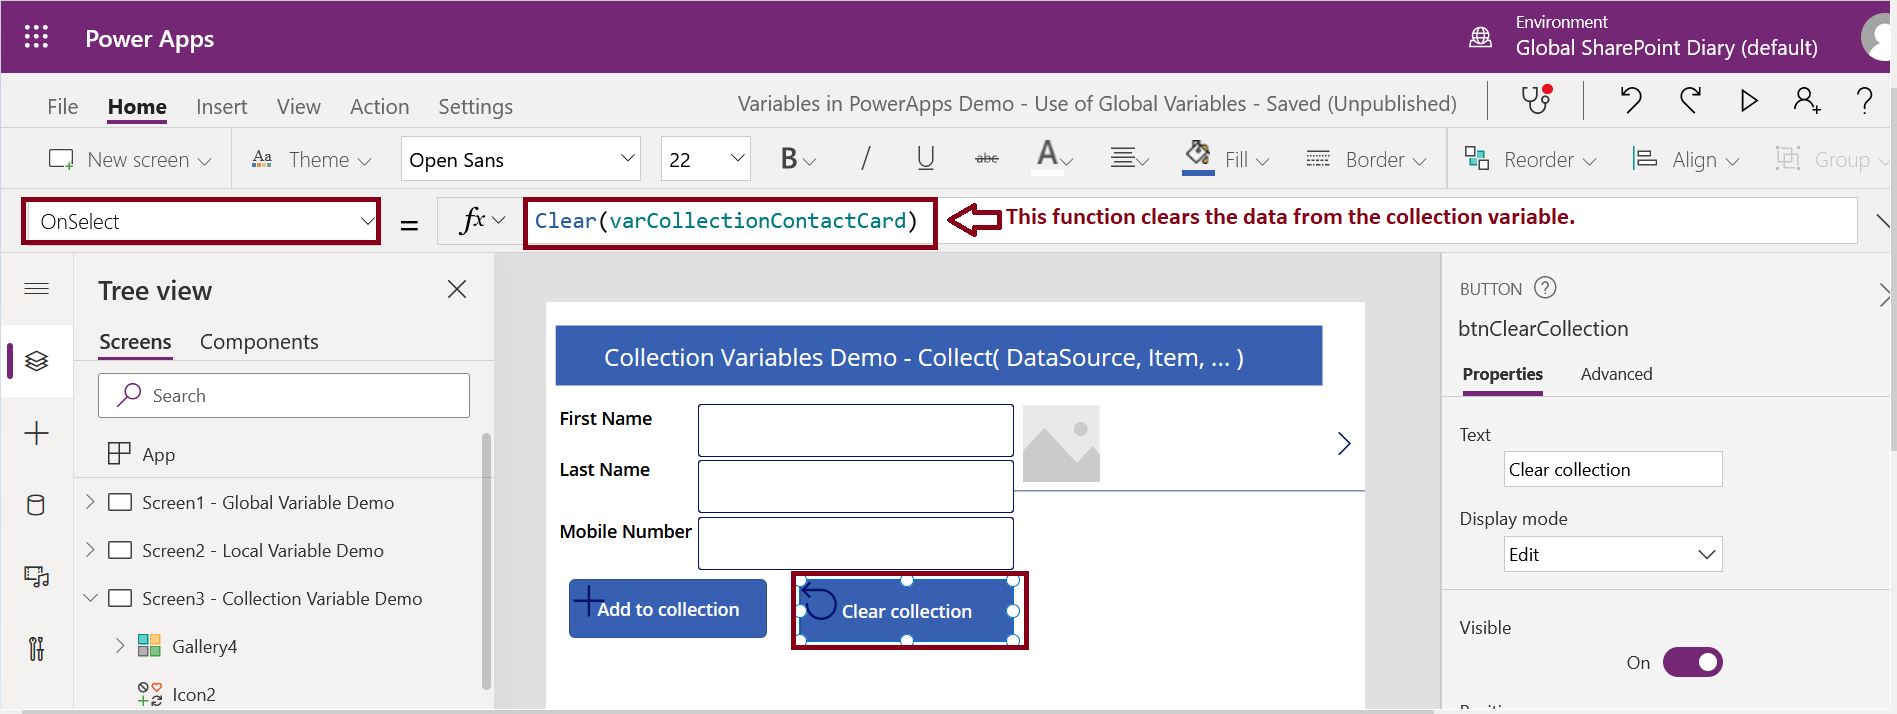 How to use clear function in PowerApps Canvas app?